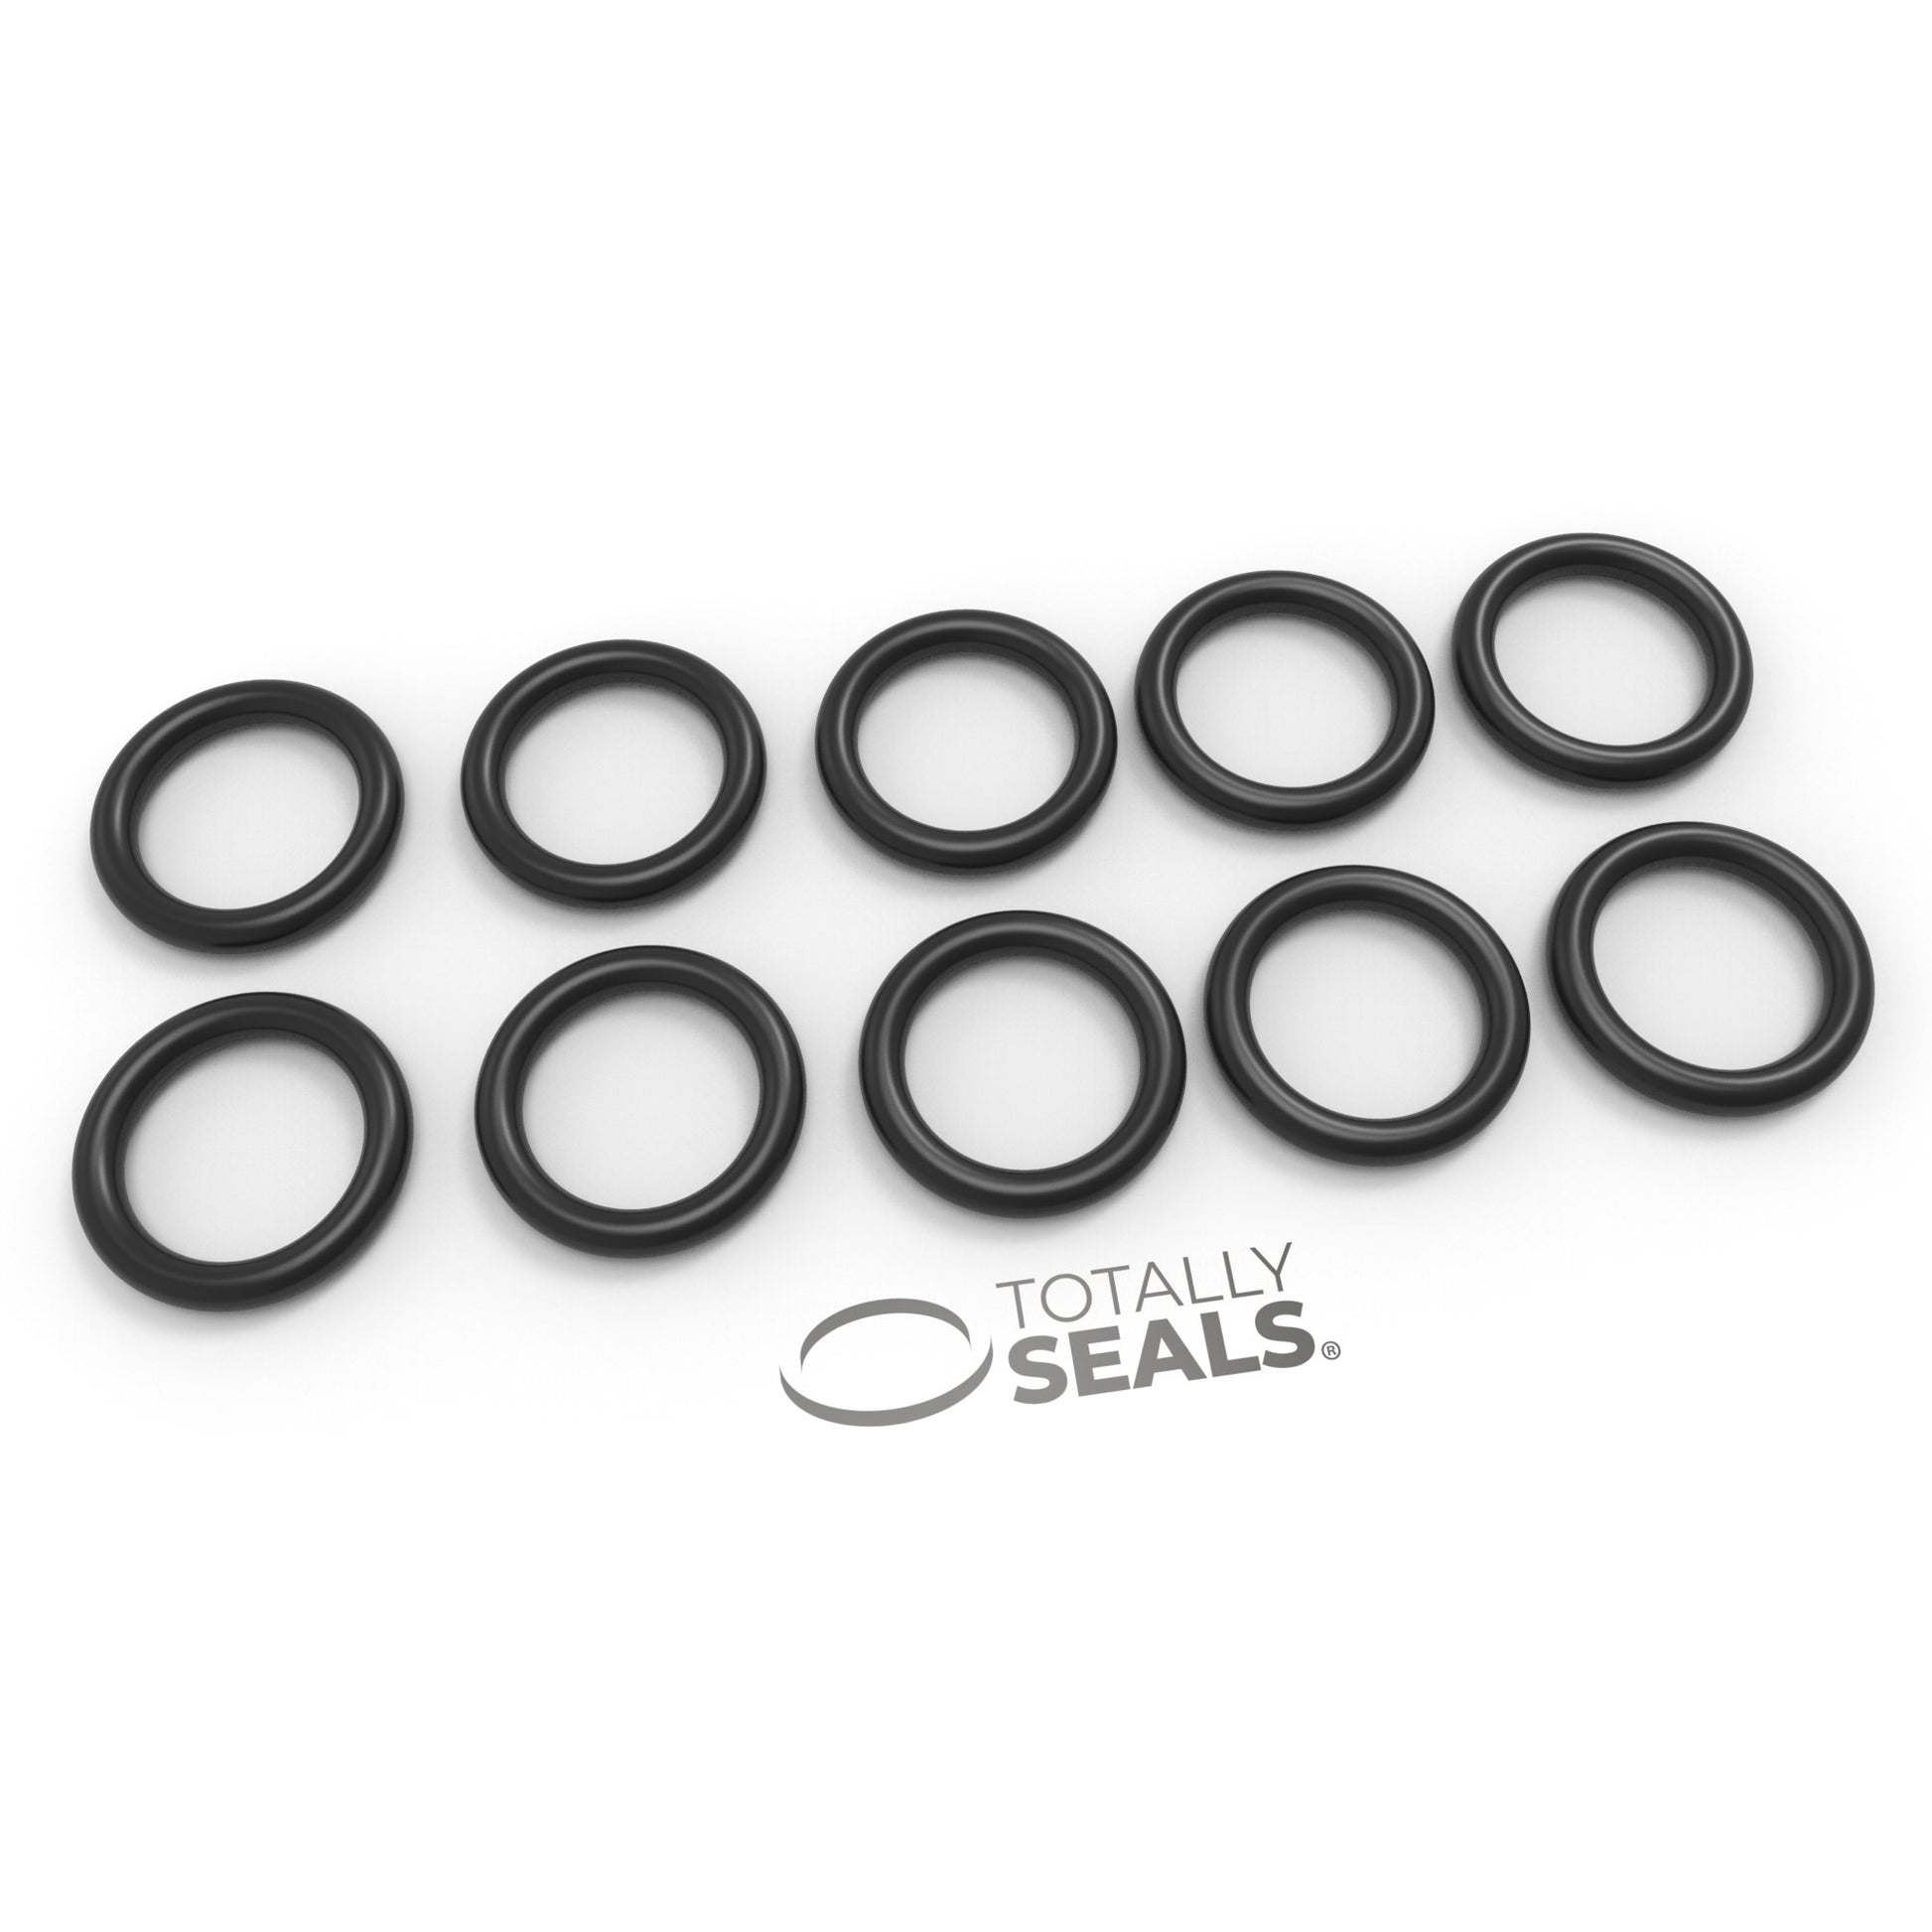 5/8" x 3/16" (BS312) Imperial Nitrile O-Rings - Totally Seals®